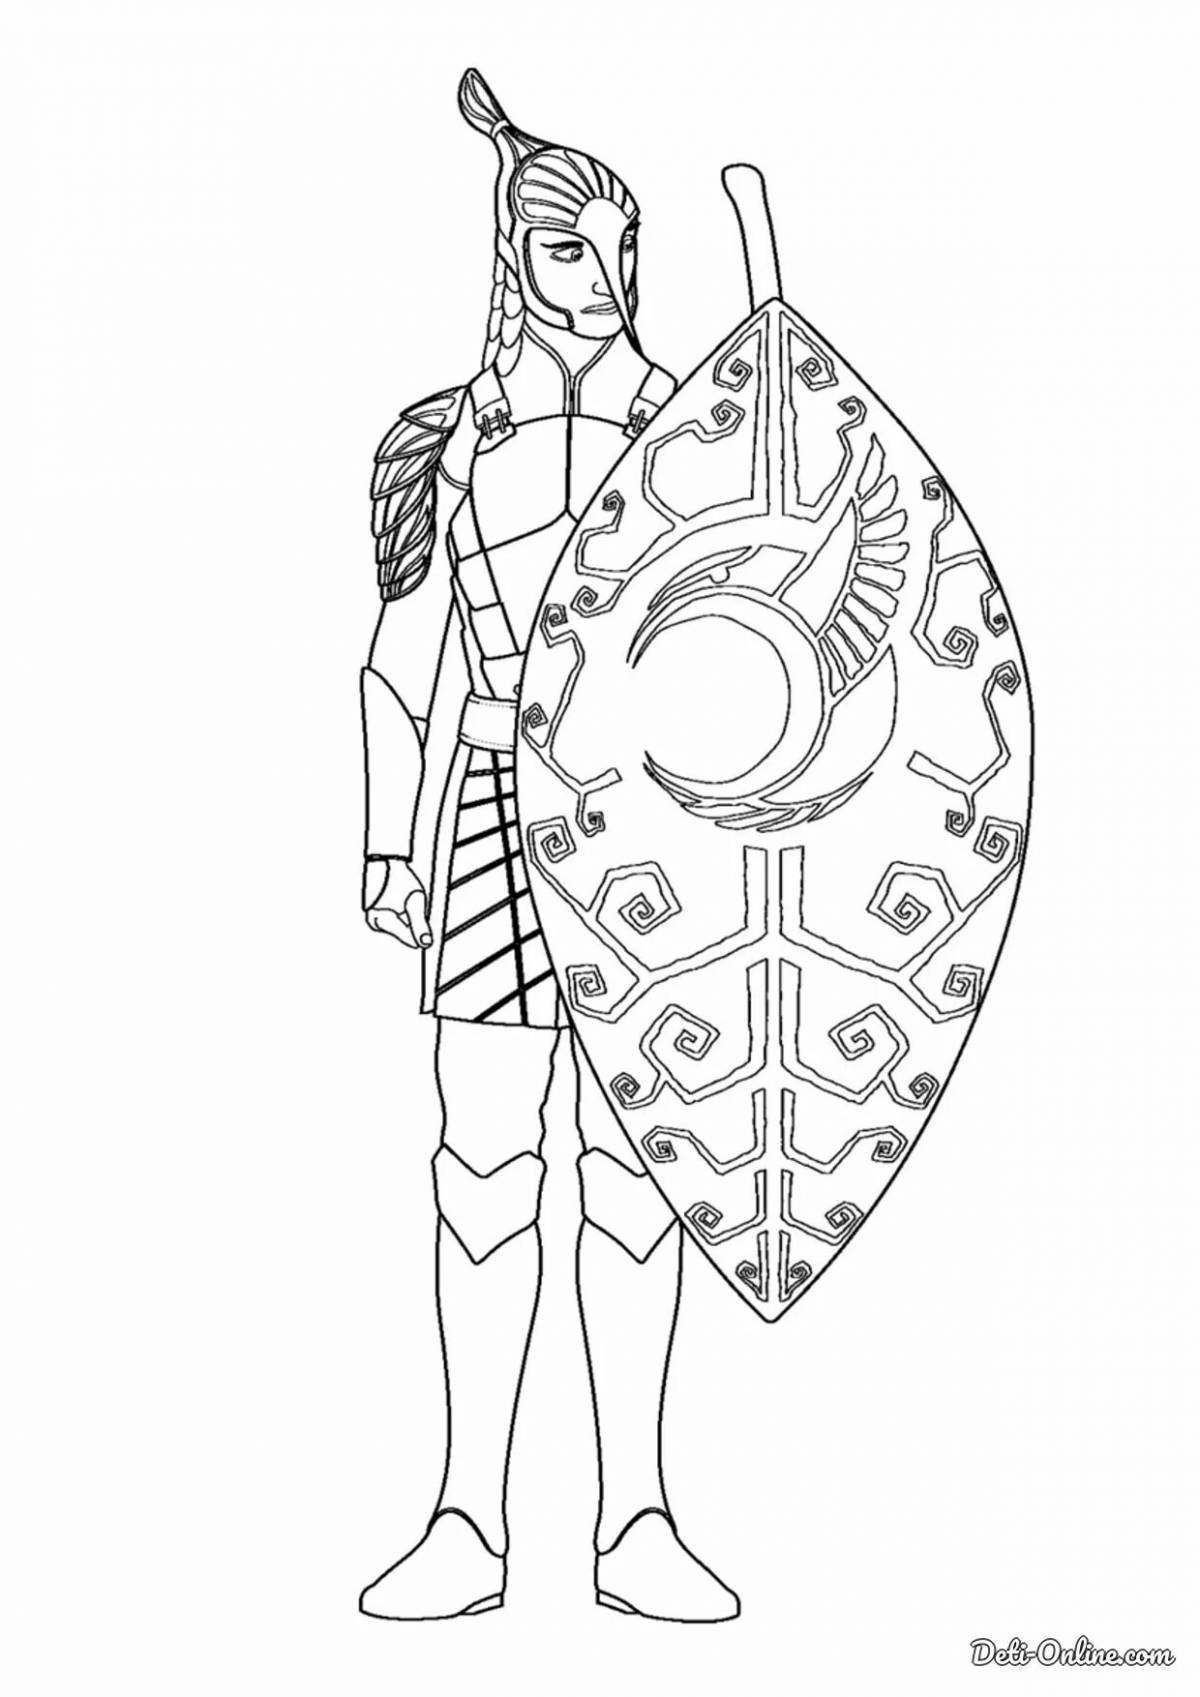 Exquisite golden man coloring page